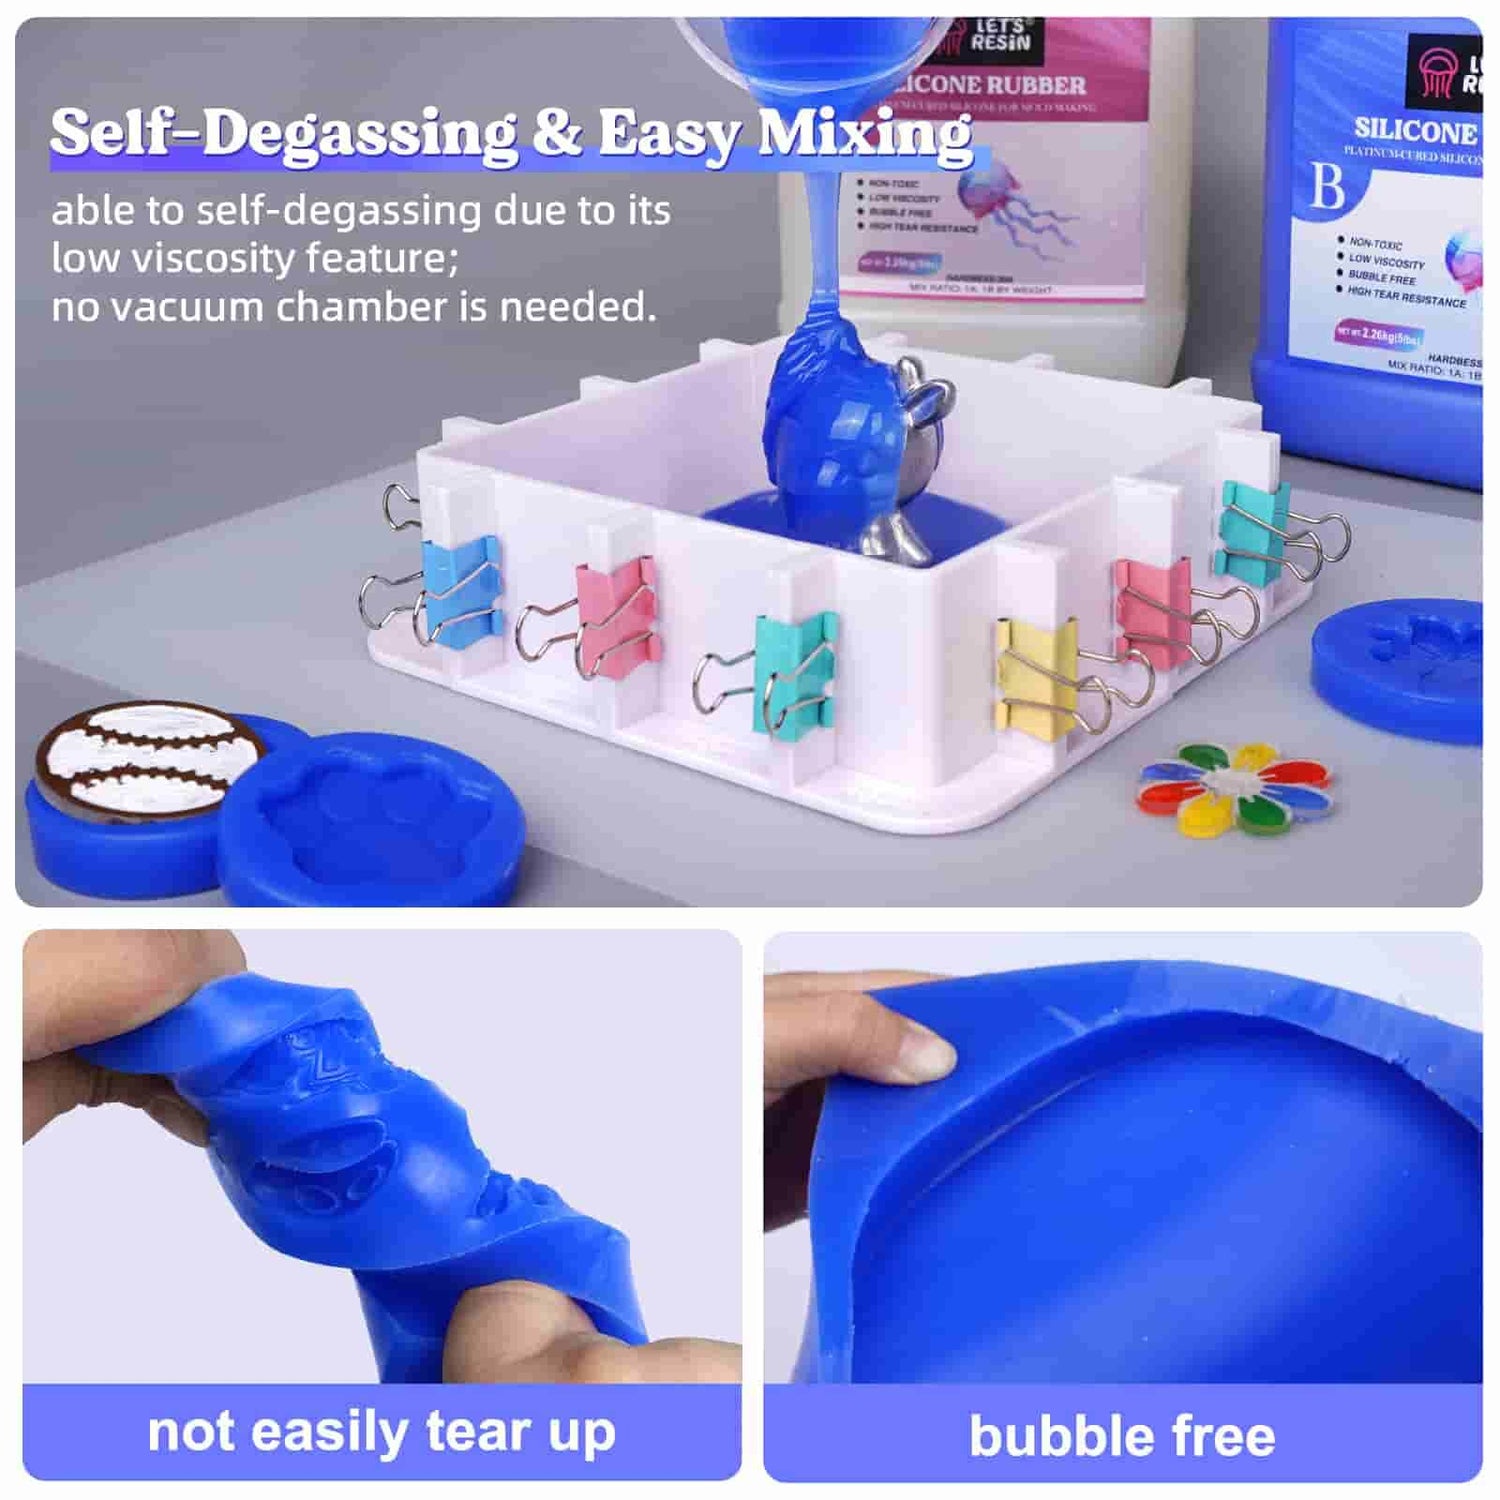 LET'S RESIN Silicone Molds Making Kit 30A, Blue Silicone for Making Molds,2  Part Molding Silicone, Liquid Silicone Rubber Mixing Ratio 1:1 - Ideal for